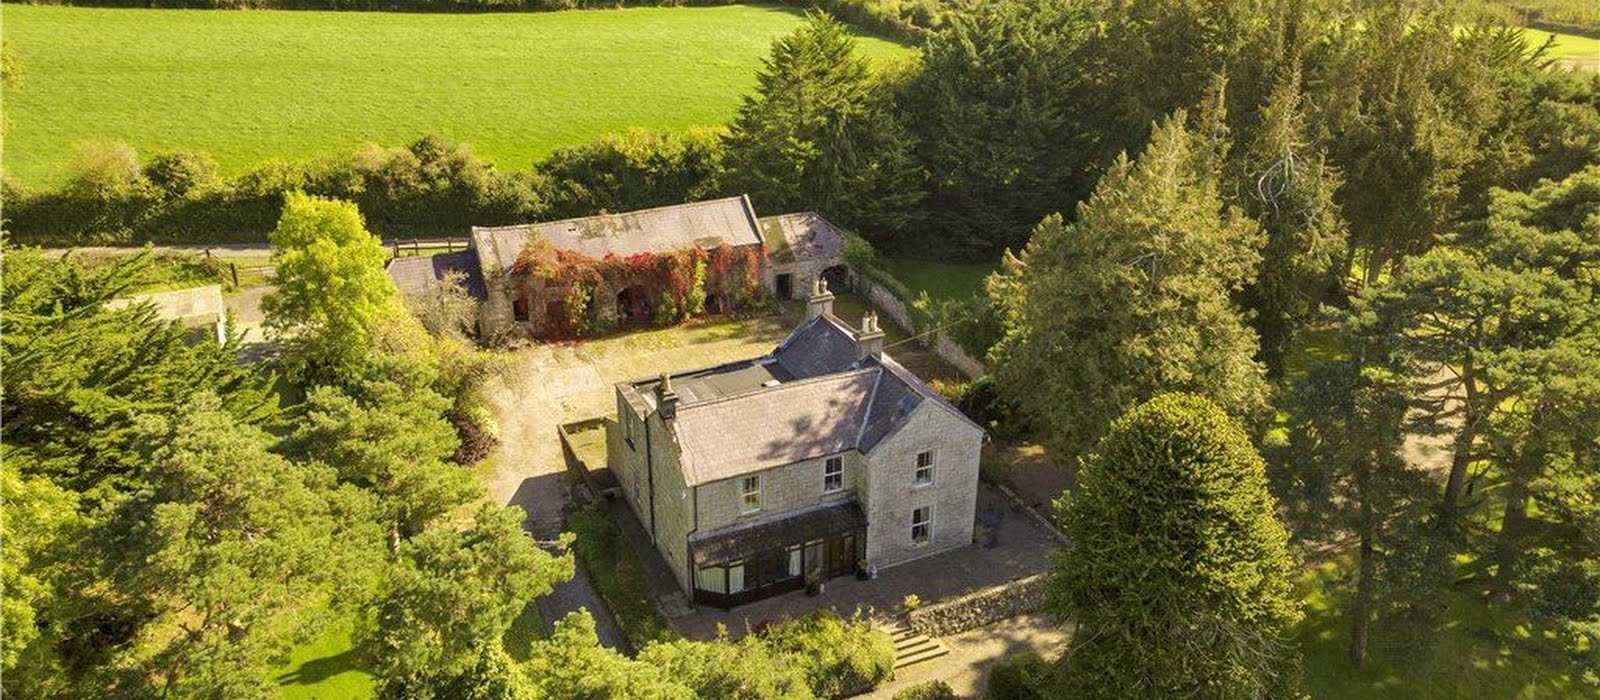 This charming Enniskerry farmhouse with gorgeous grounds is on the market for €2.5 million